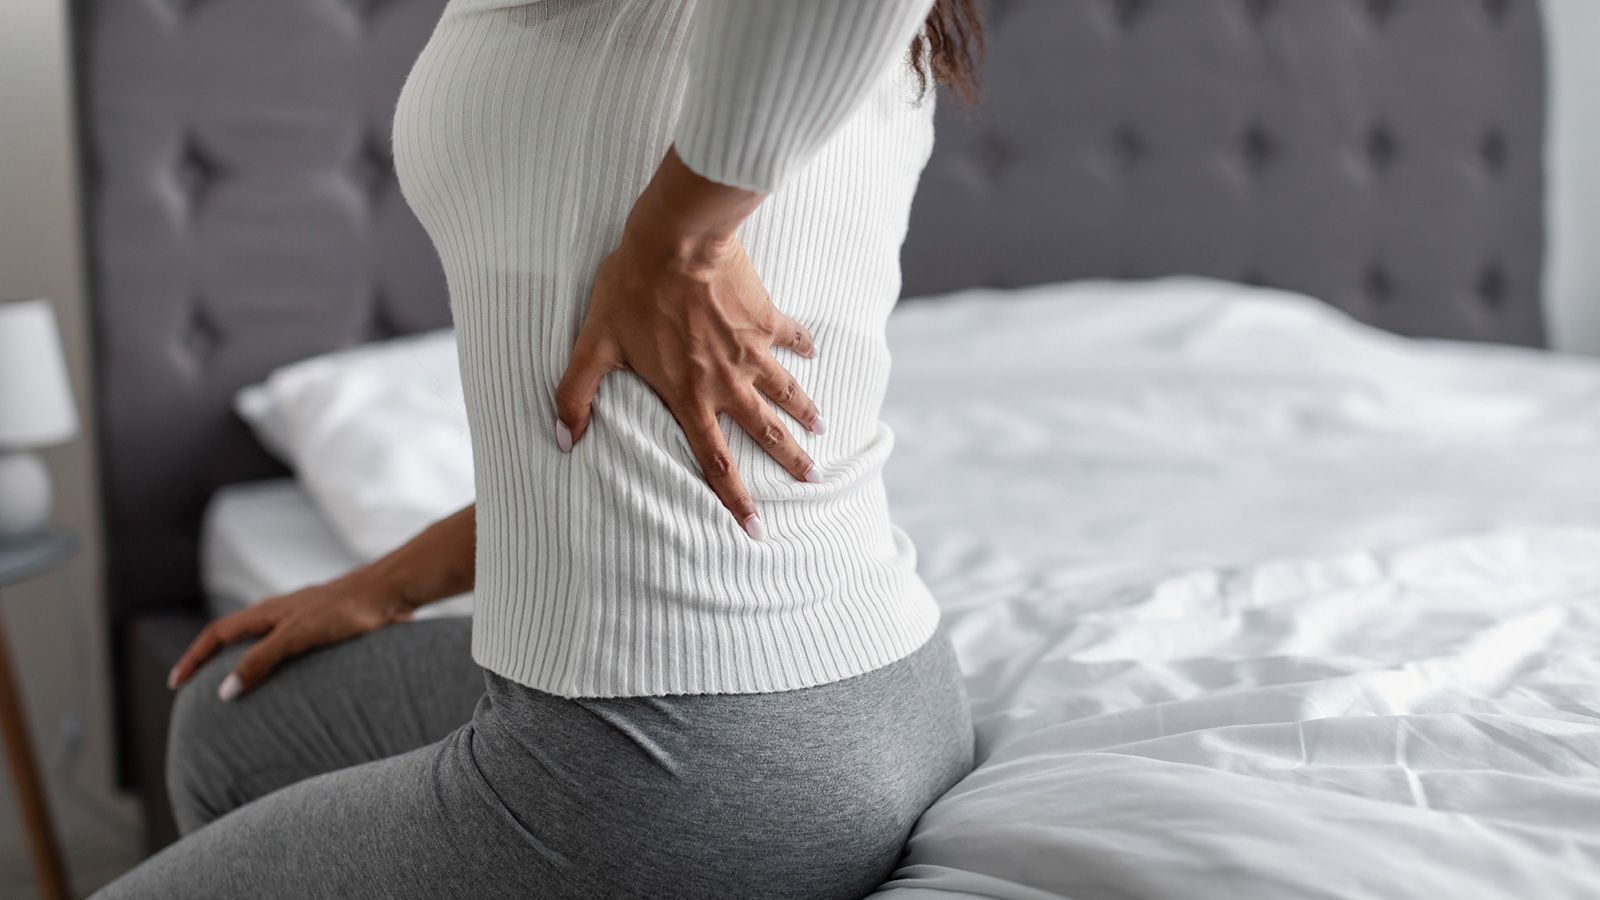 Fix back pain, the common enemy for men. Try a full back massage